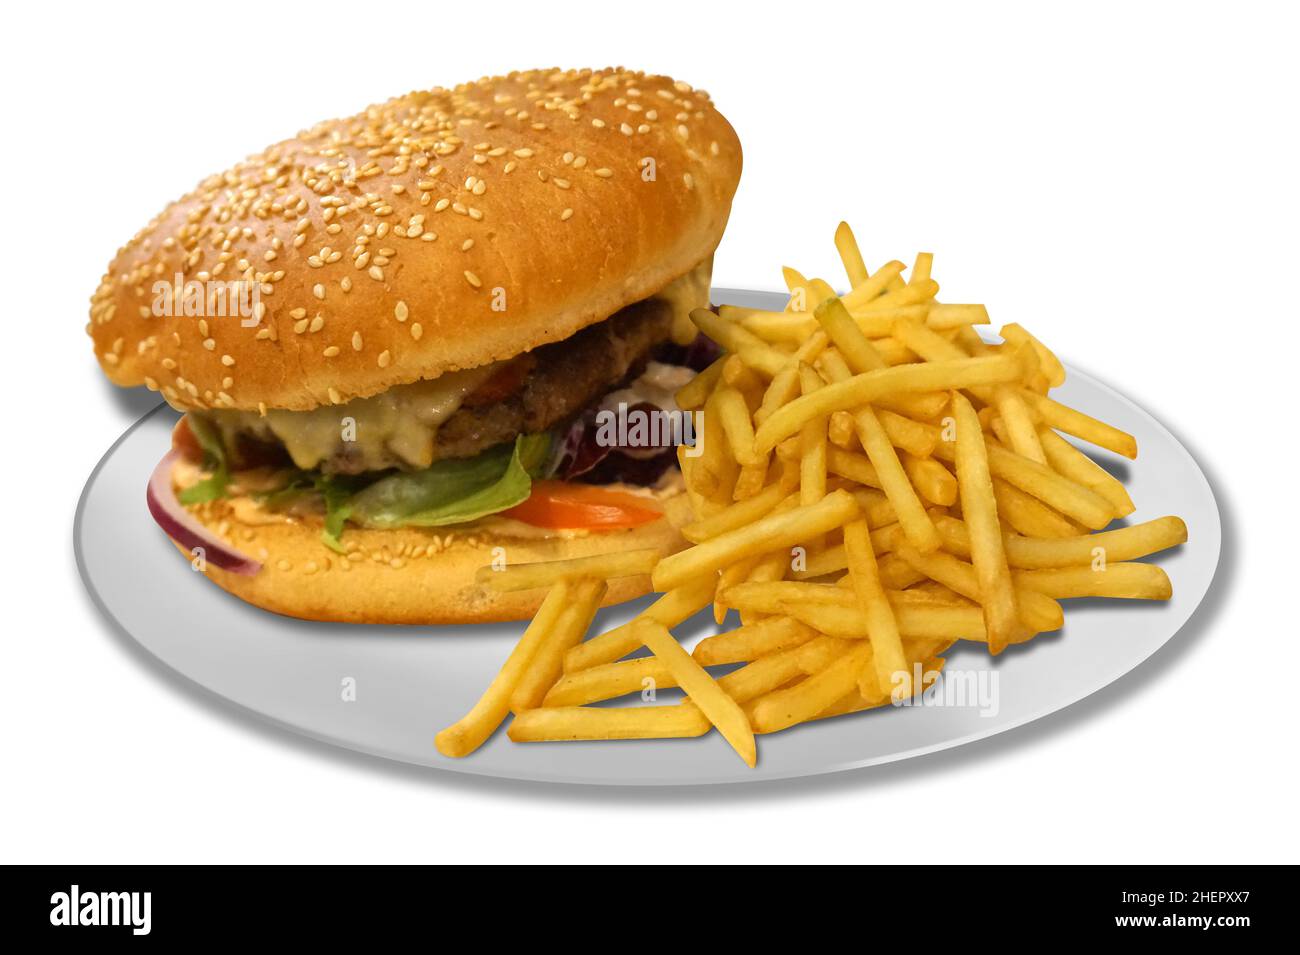 Burger and french fries on plate Stock Photo